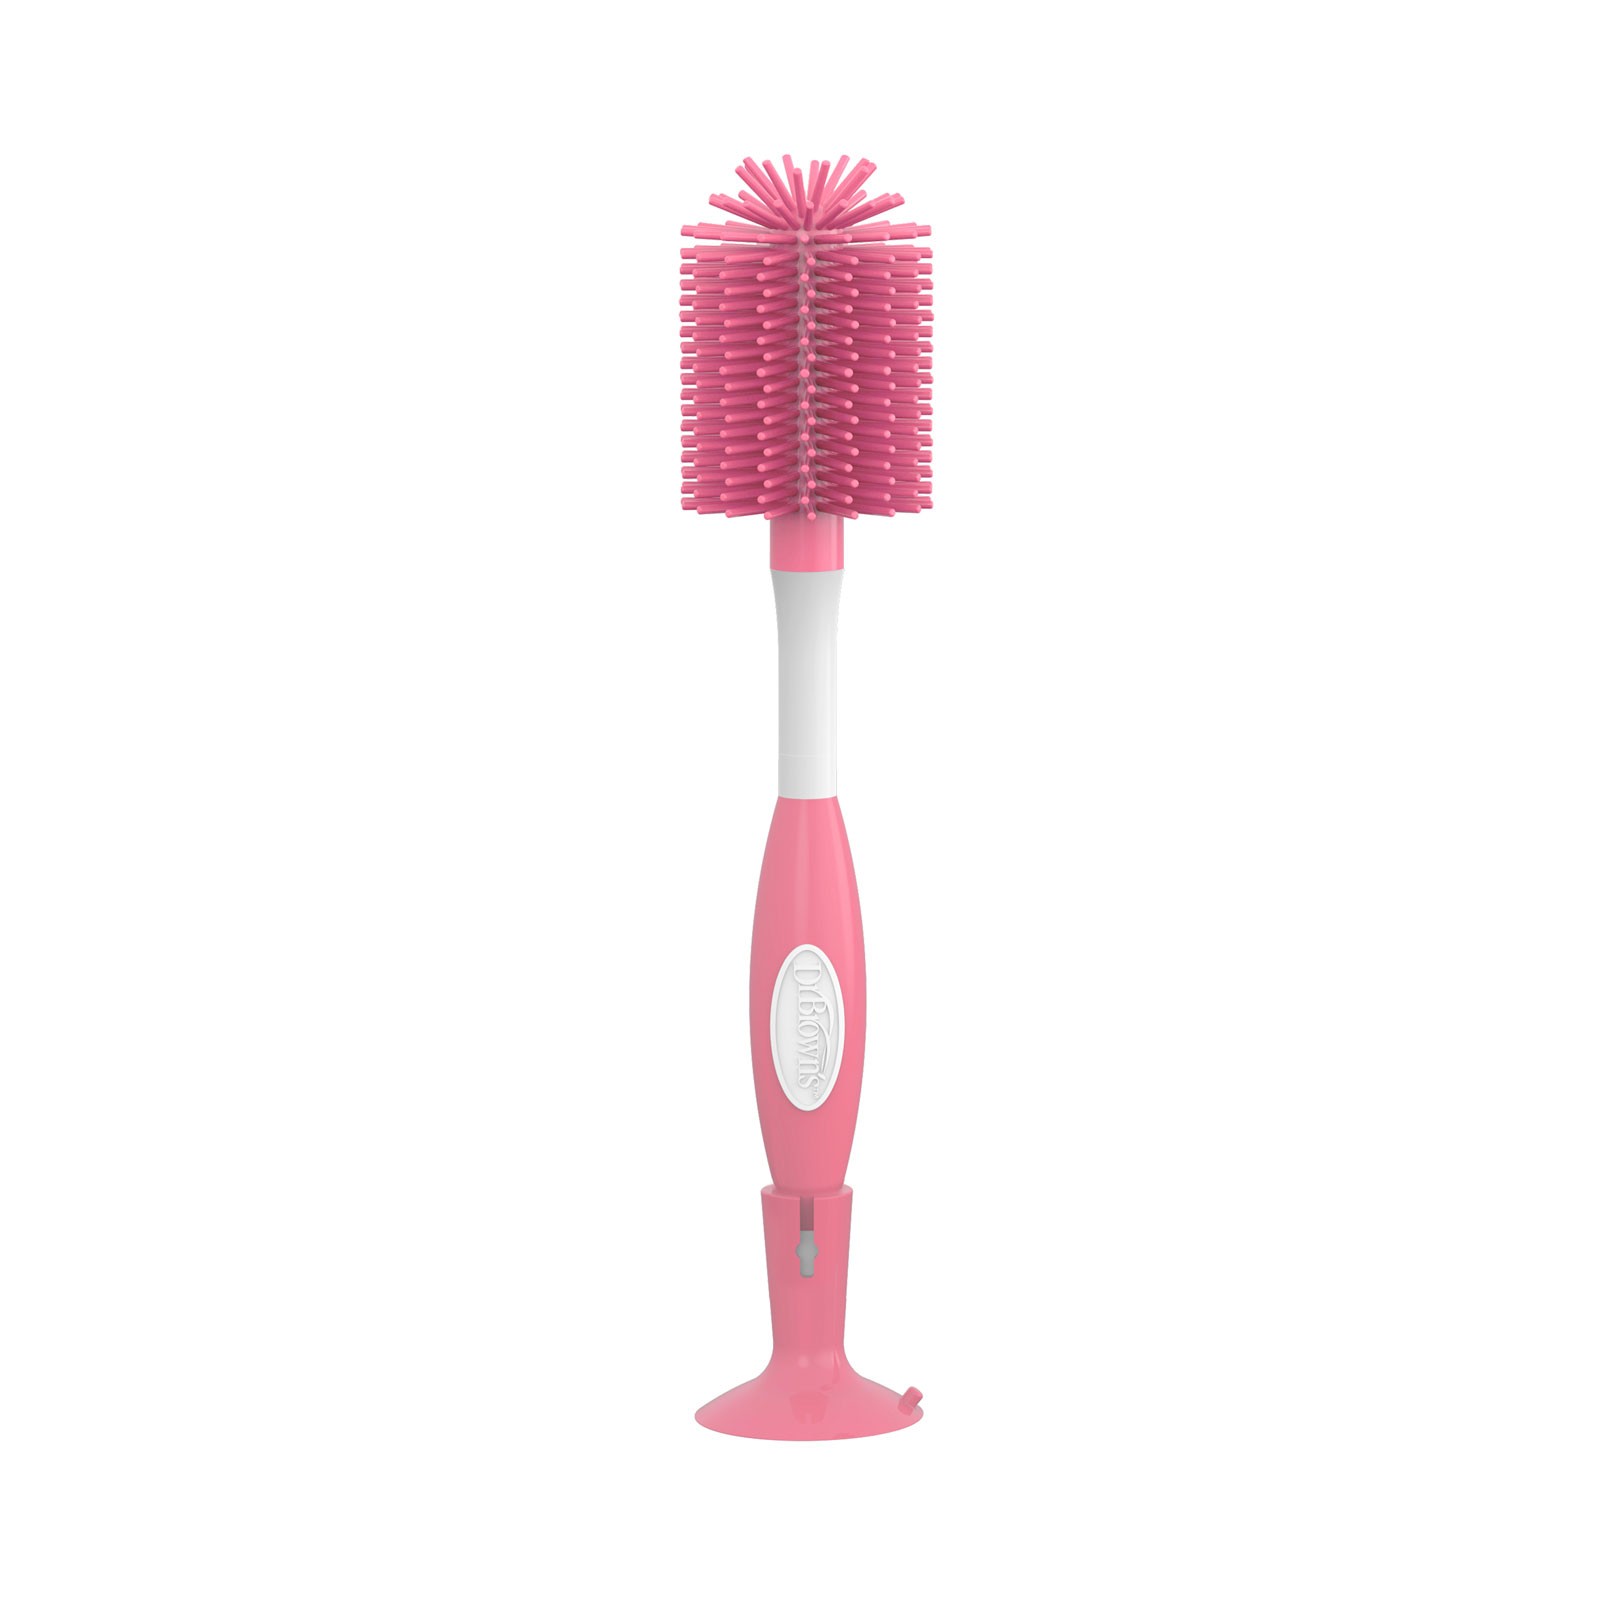 Soft Cleaning Brush